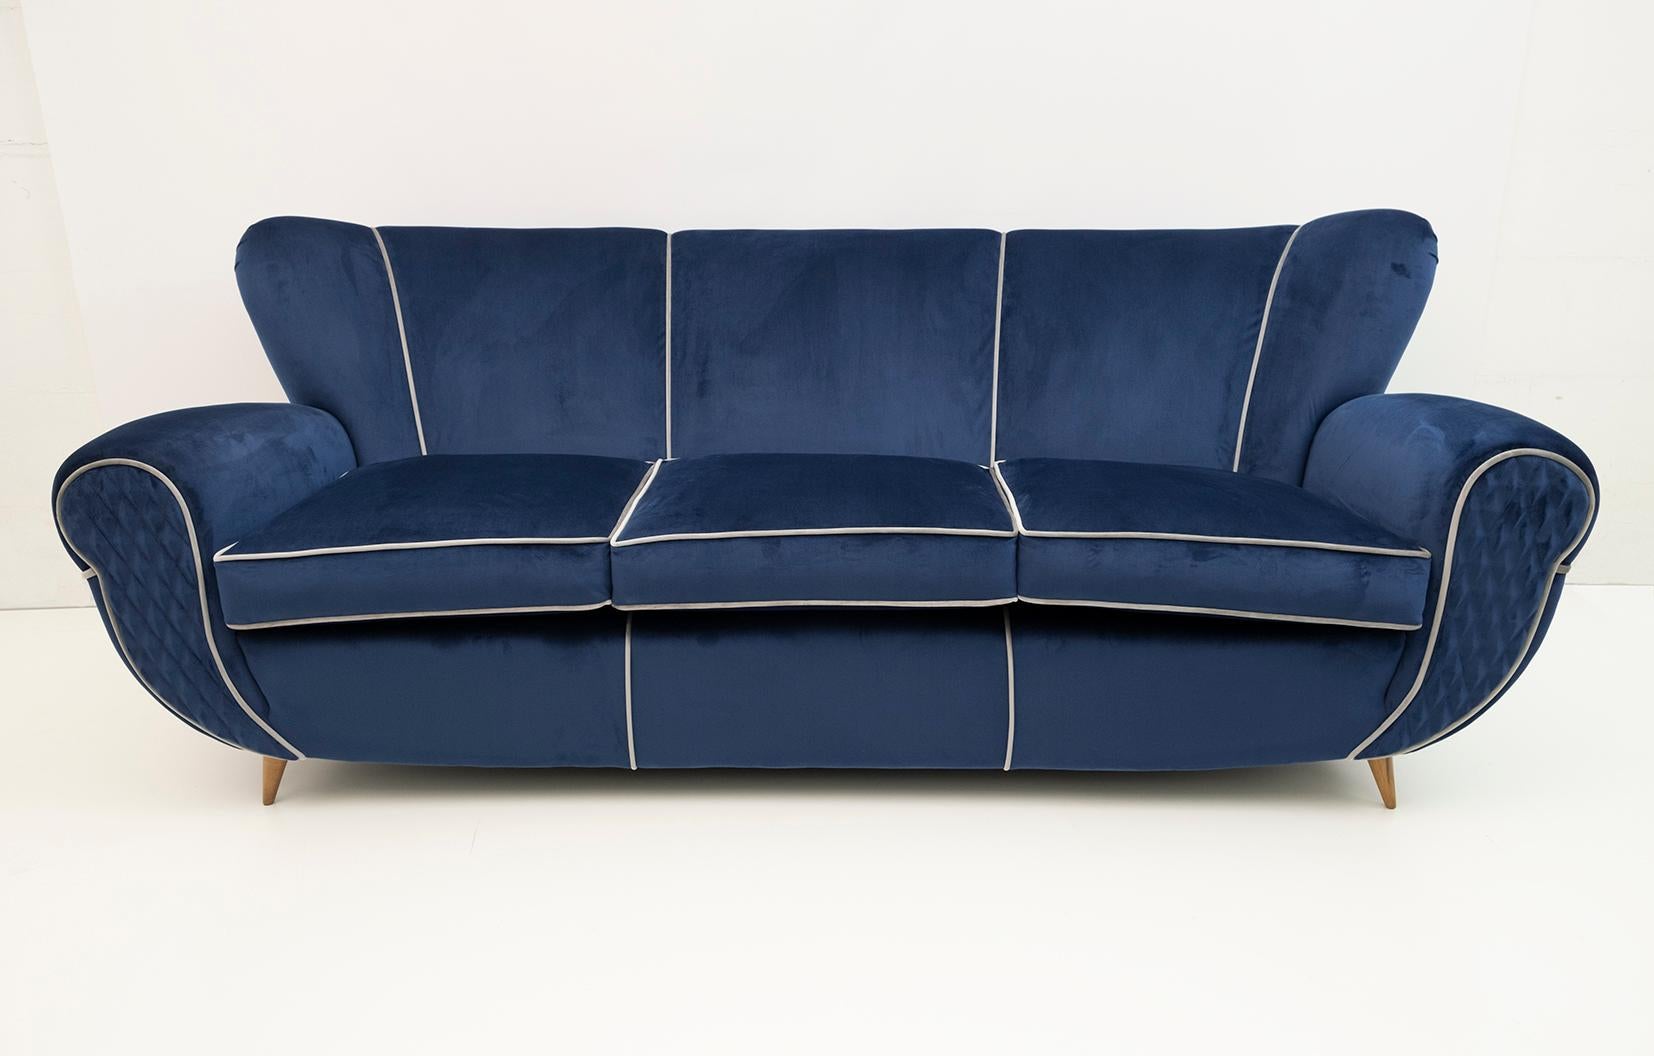 A large Italian sculptural sofa designed by Guglielmo Ulrich, very comfortable. Recently upholstered in light blue velvet with a light gray velvet border, in a minimalist way, which accentuates the curved shapes. The tapered and curved feet in beech